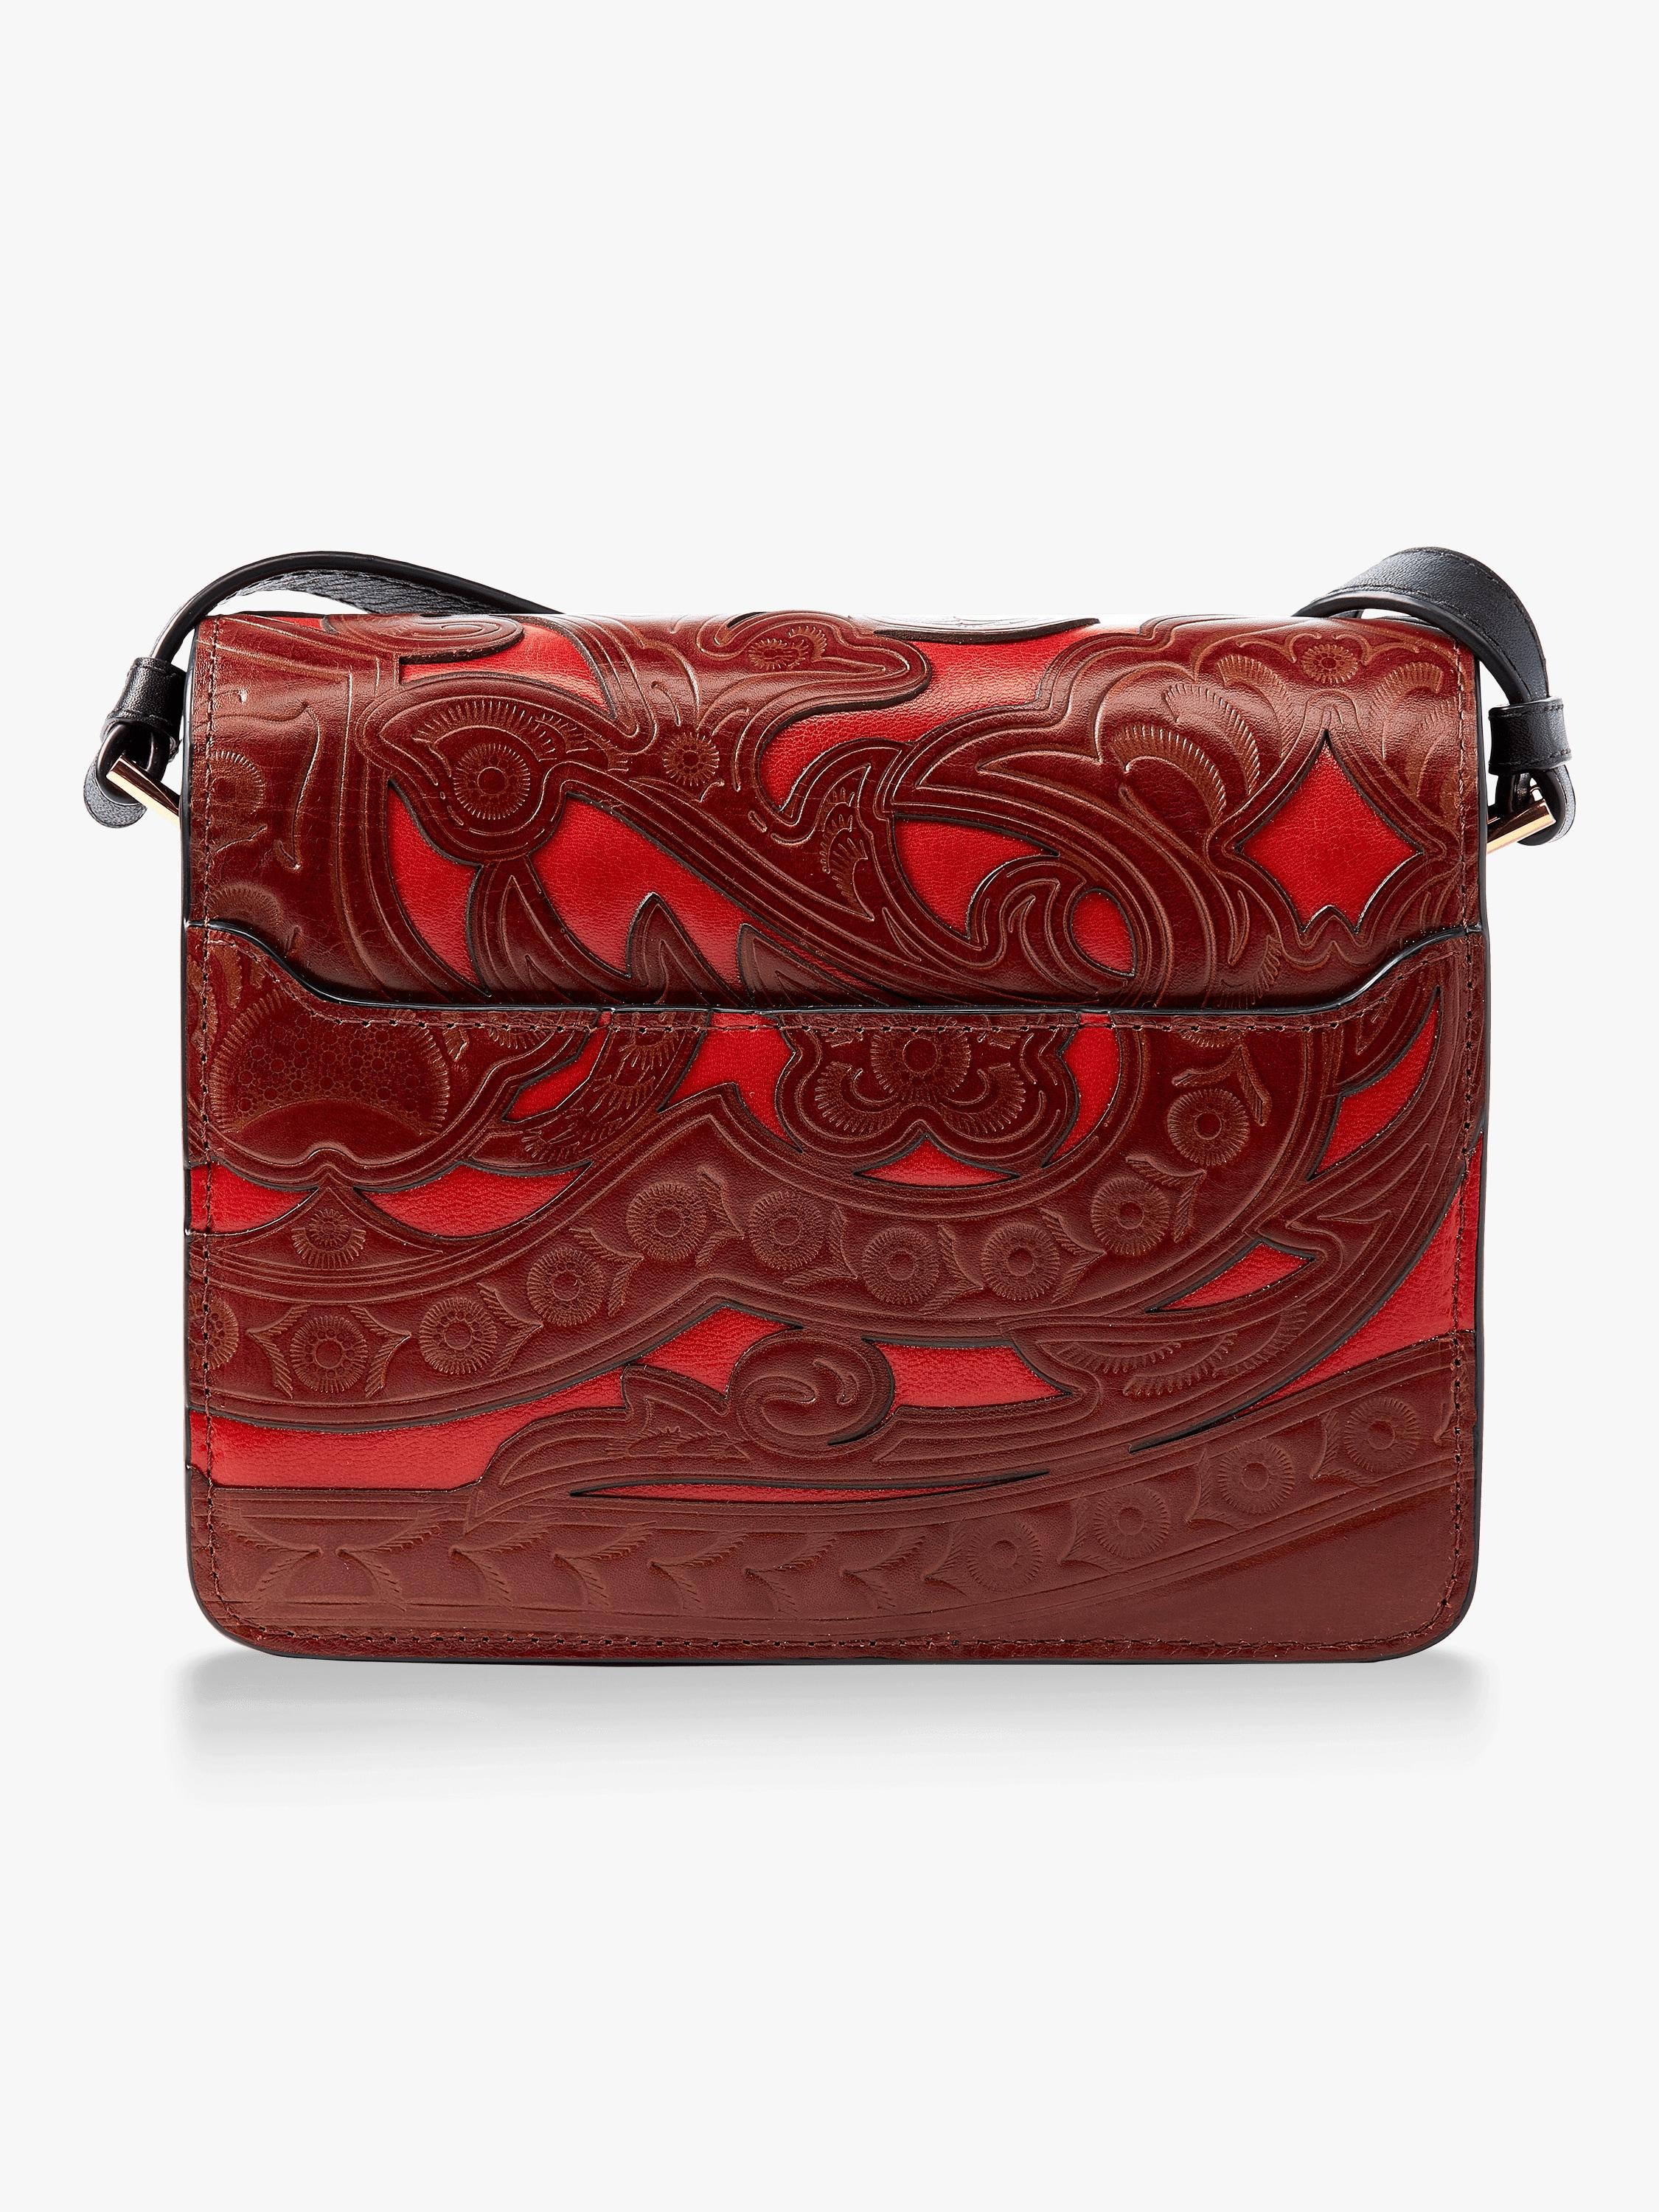 Hayward Tooled Leather Mini Crossbody Bag in Red/Black (Red) - Lyst